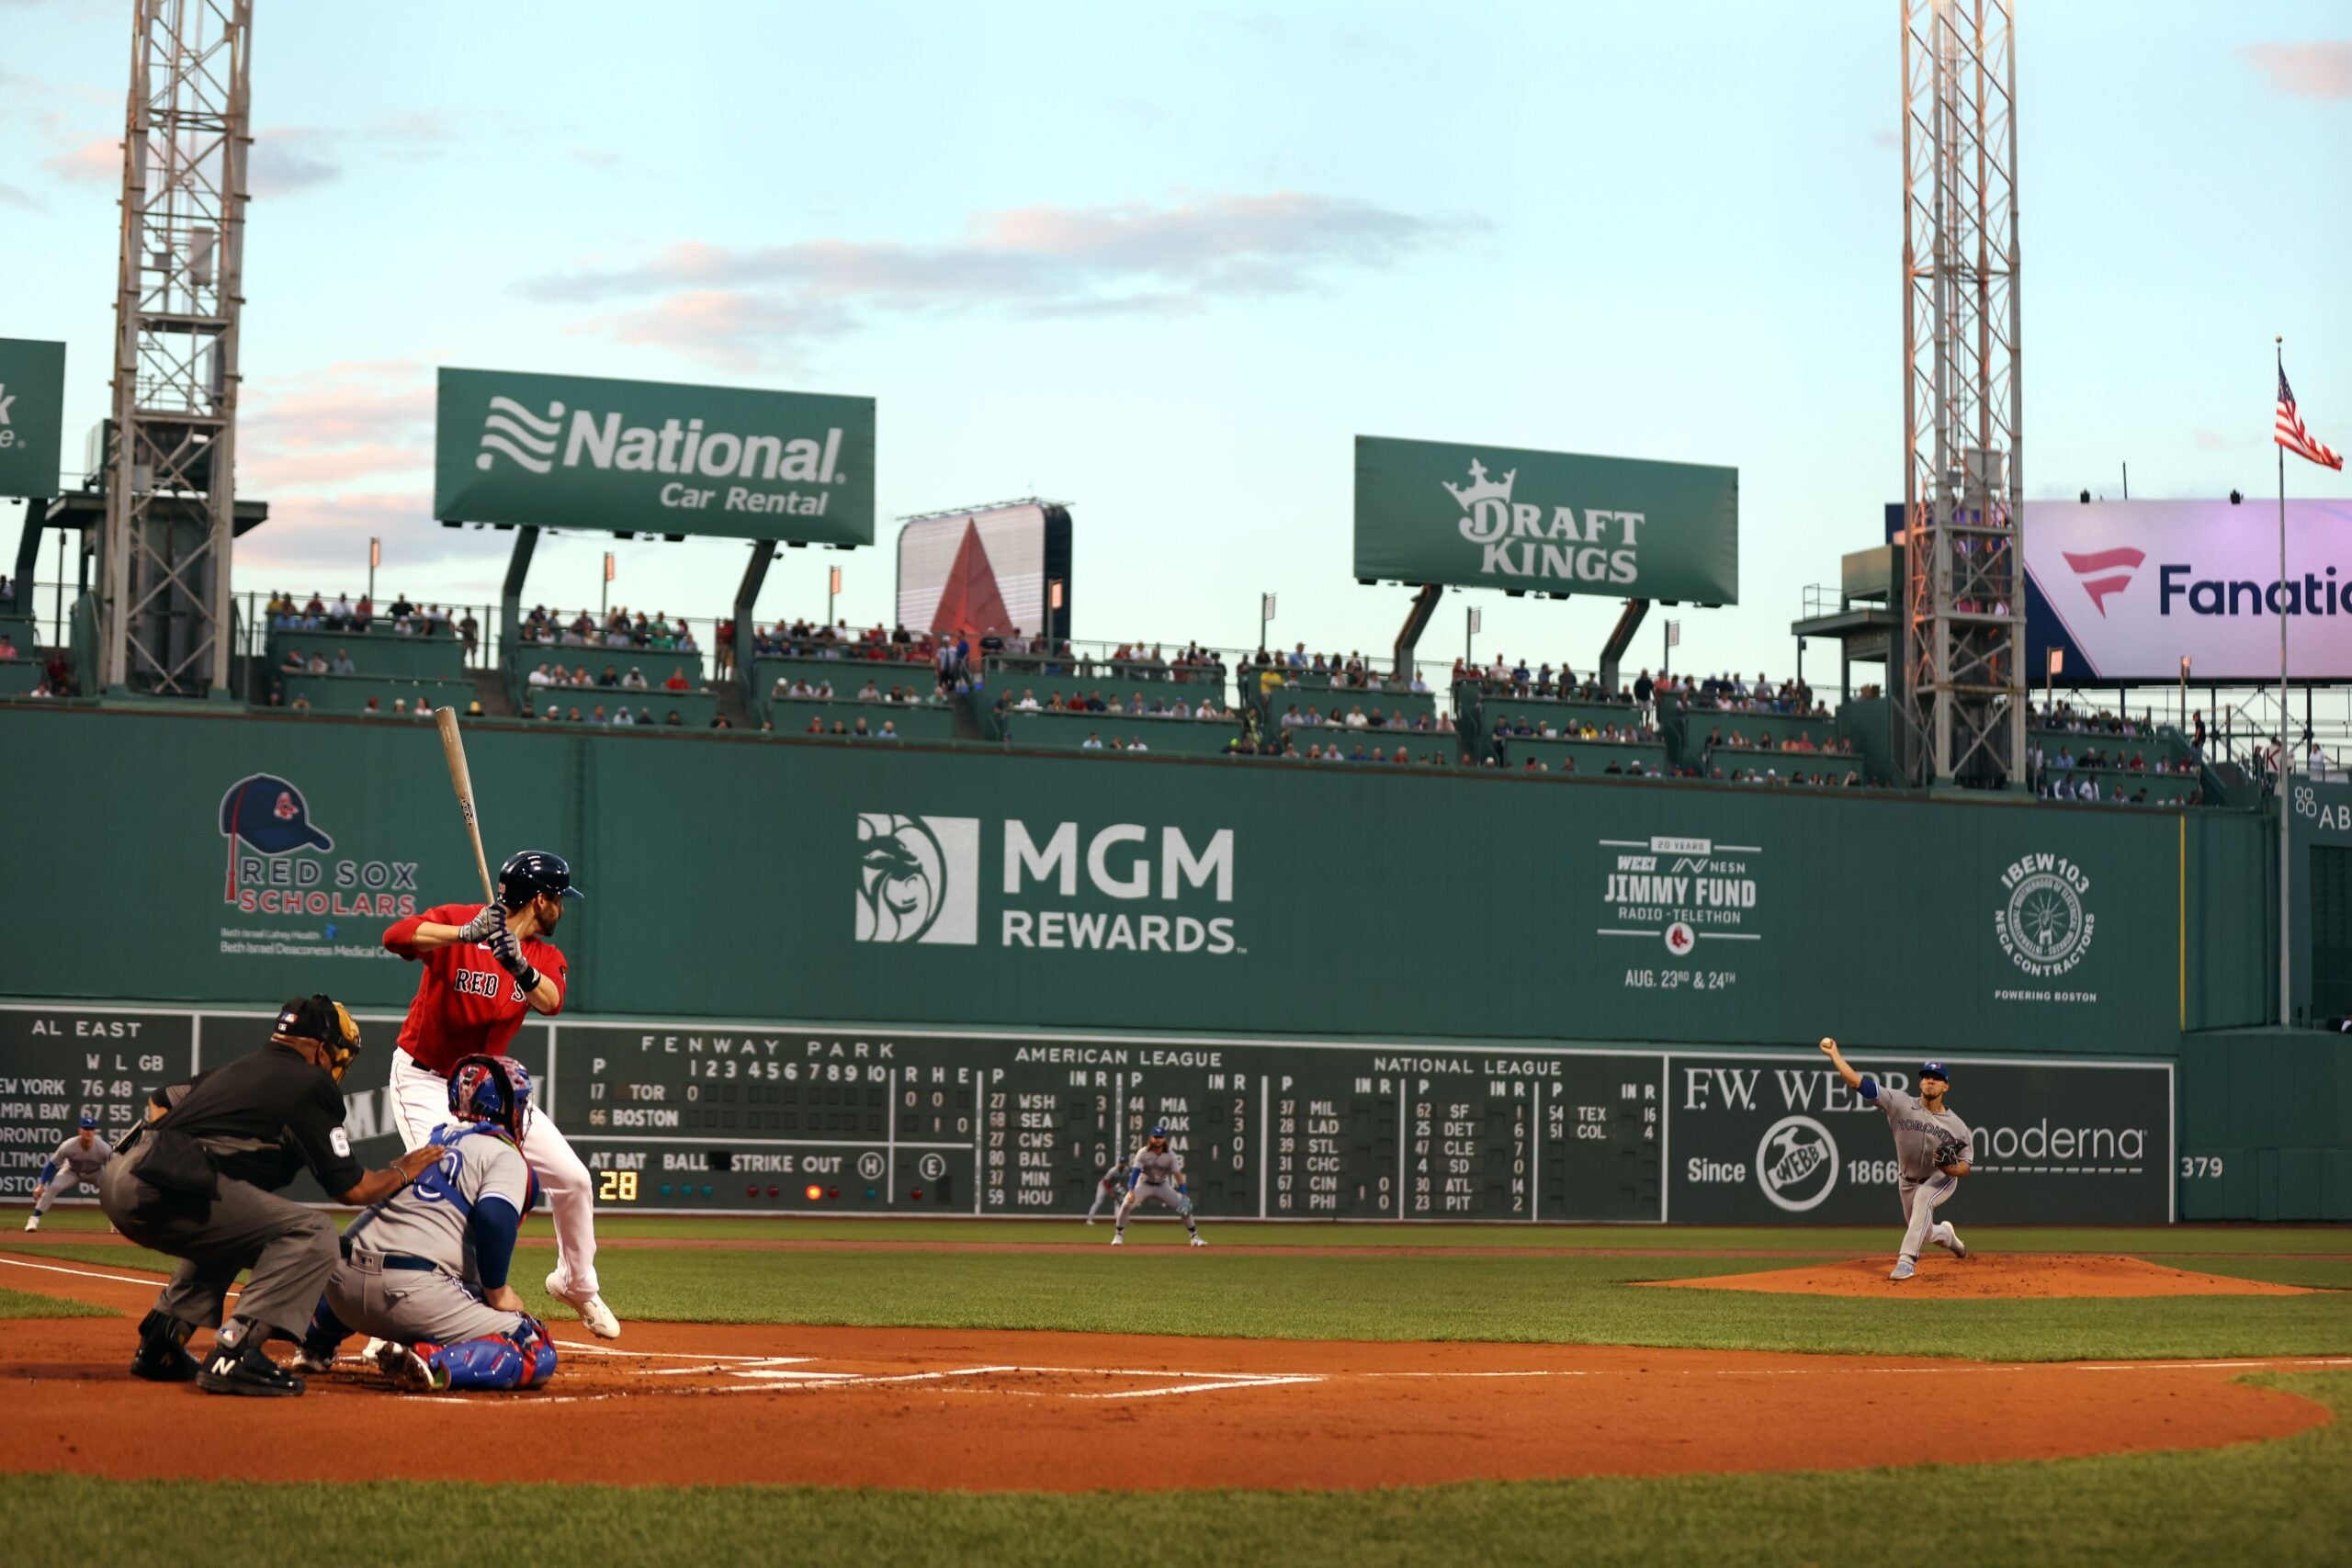 Red Sox hosting Twins for 2022 opening day at Fenway